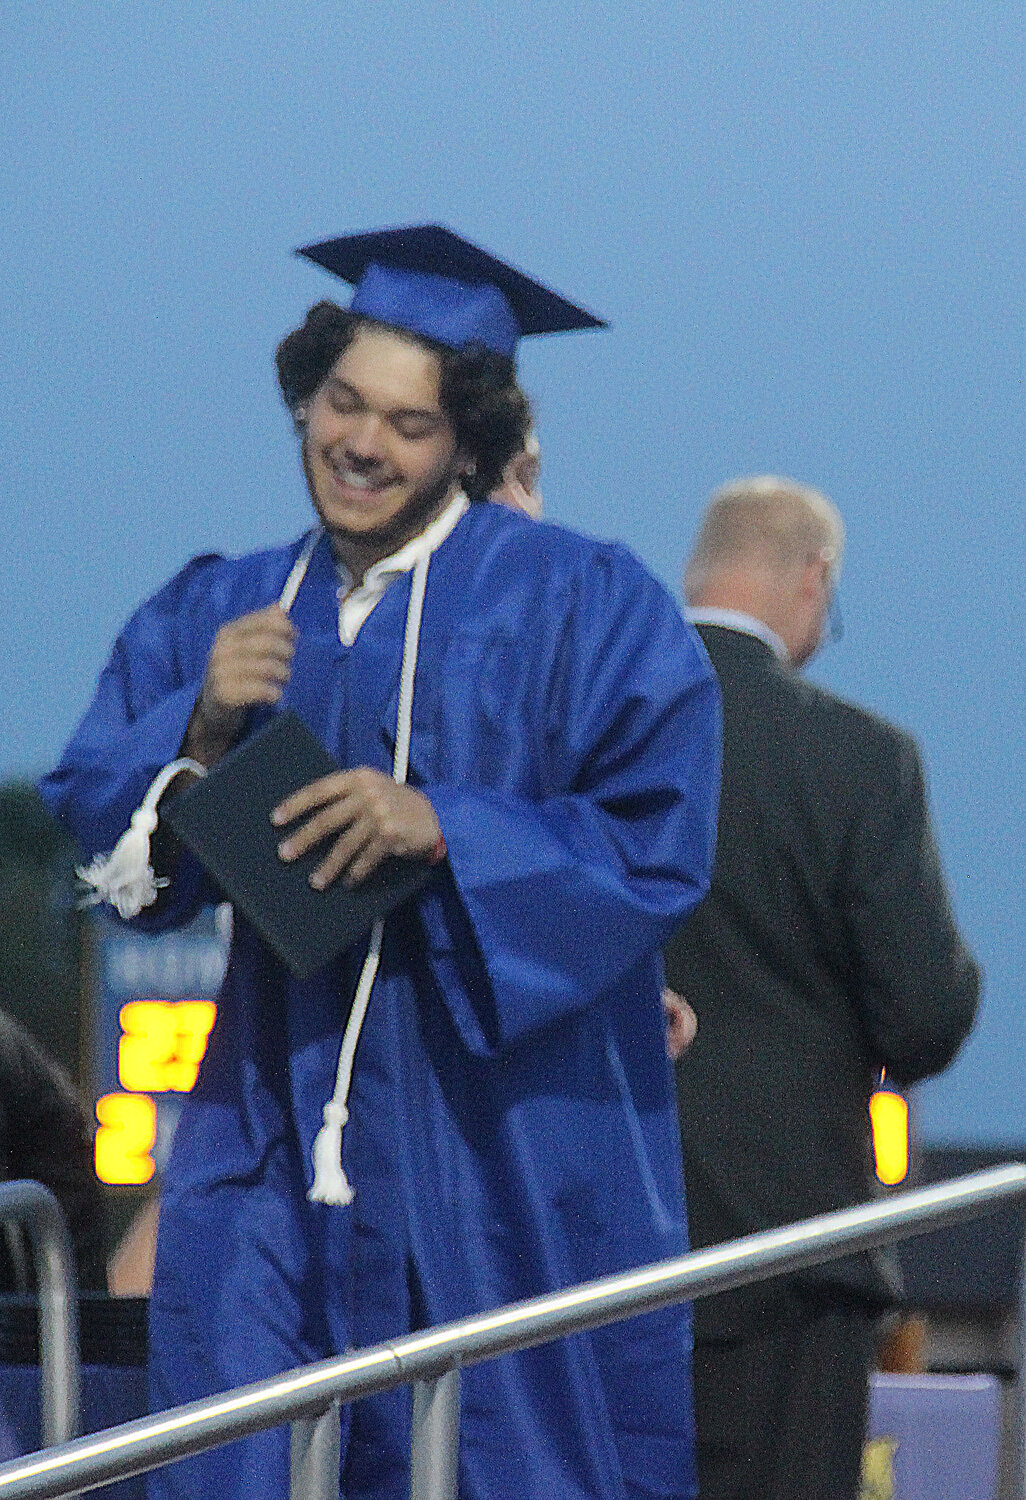 Roman Addaway was the first Wright City High School senior to cross the stage and receive his diploma cover during the graduation ceremony.